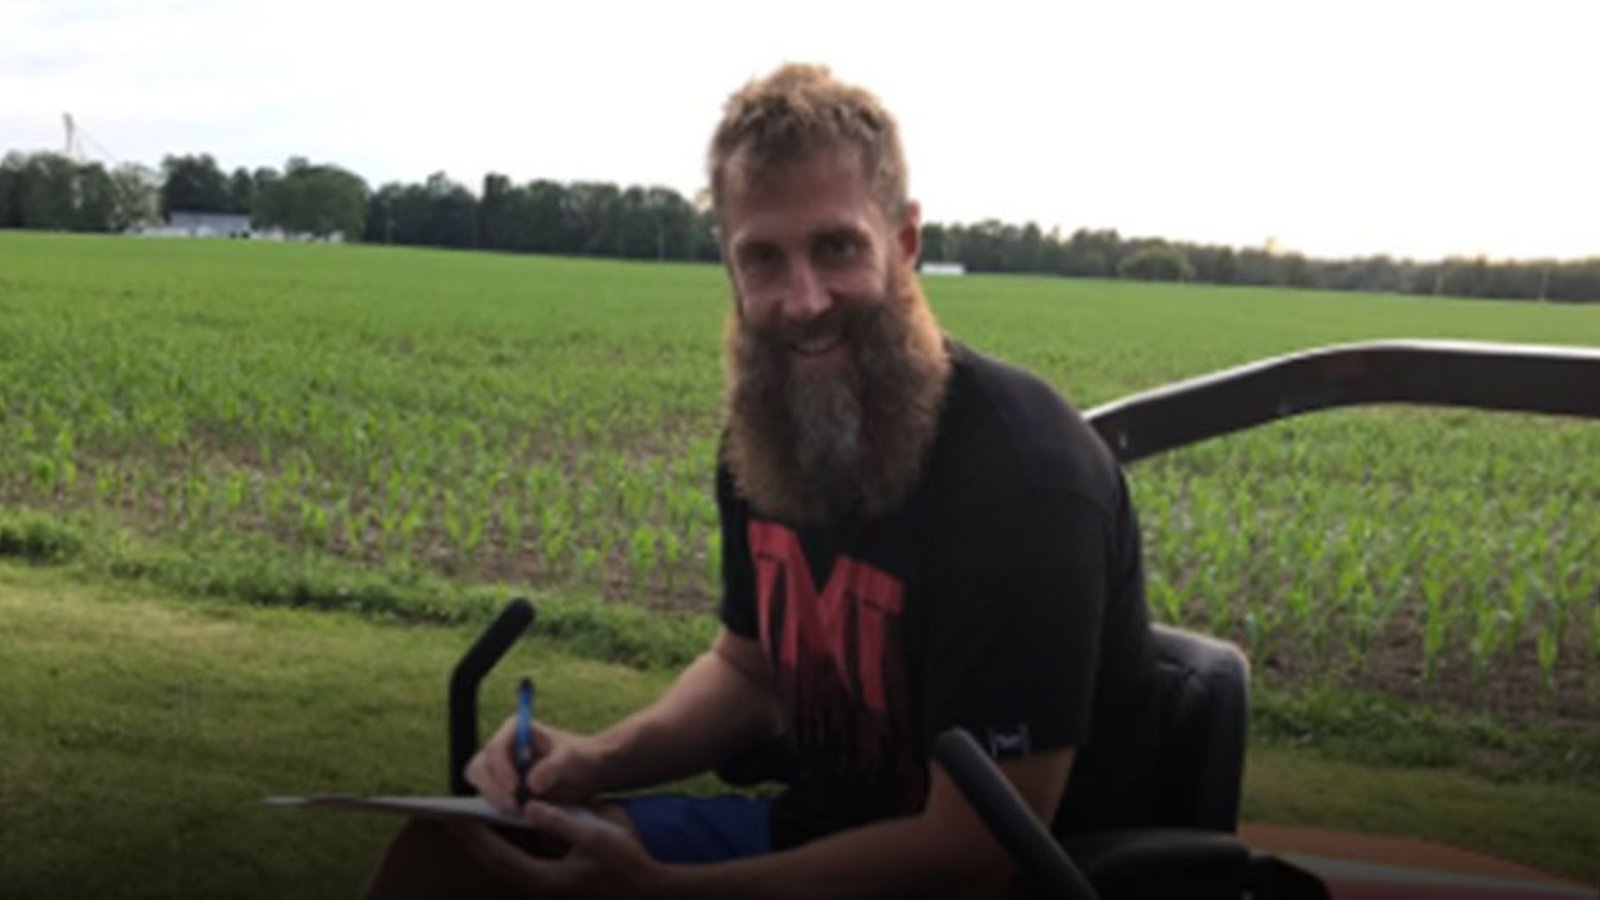 Gotta See It: Thornton inks new deal while mowing lawn in flip-flops